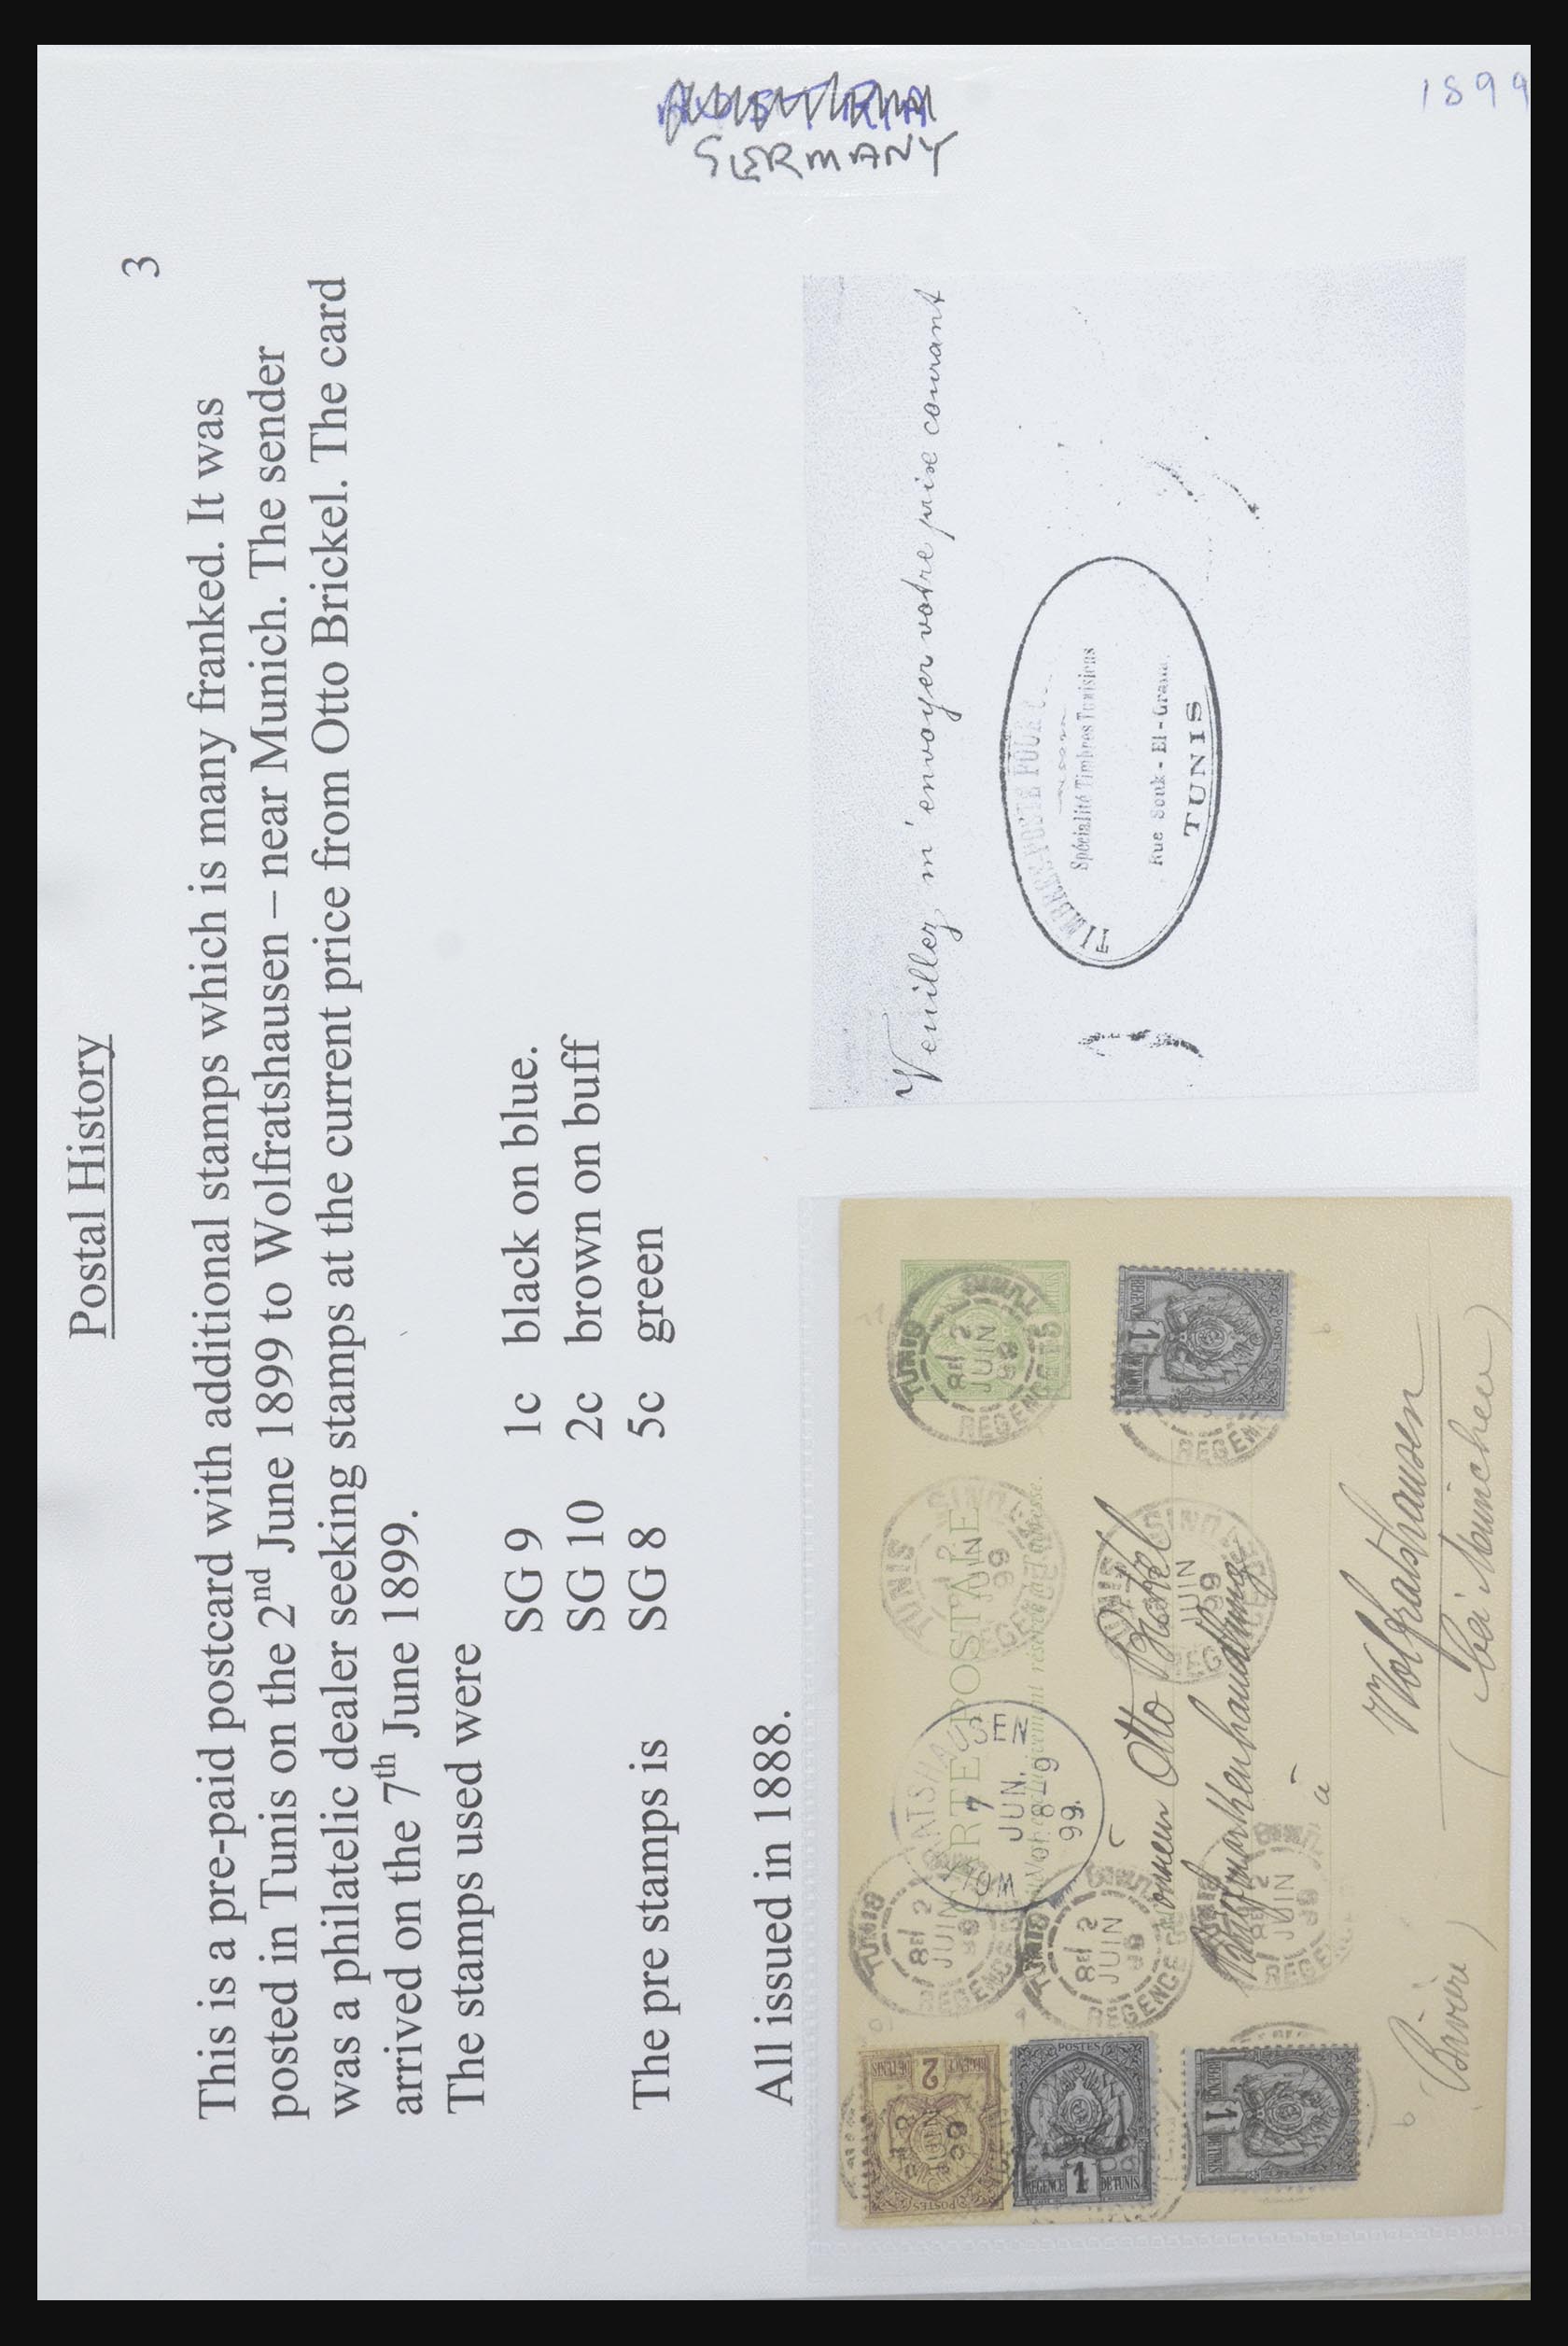 31707 019 - 31707 Tunisia covers and postal stationeries 1888-1920.